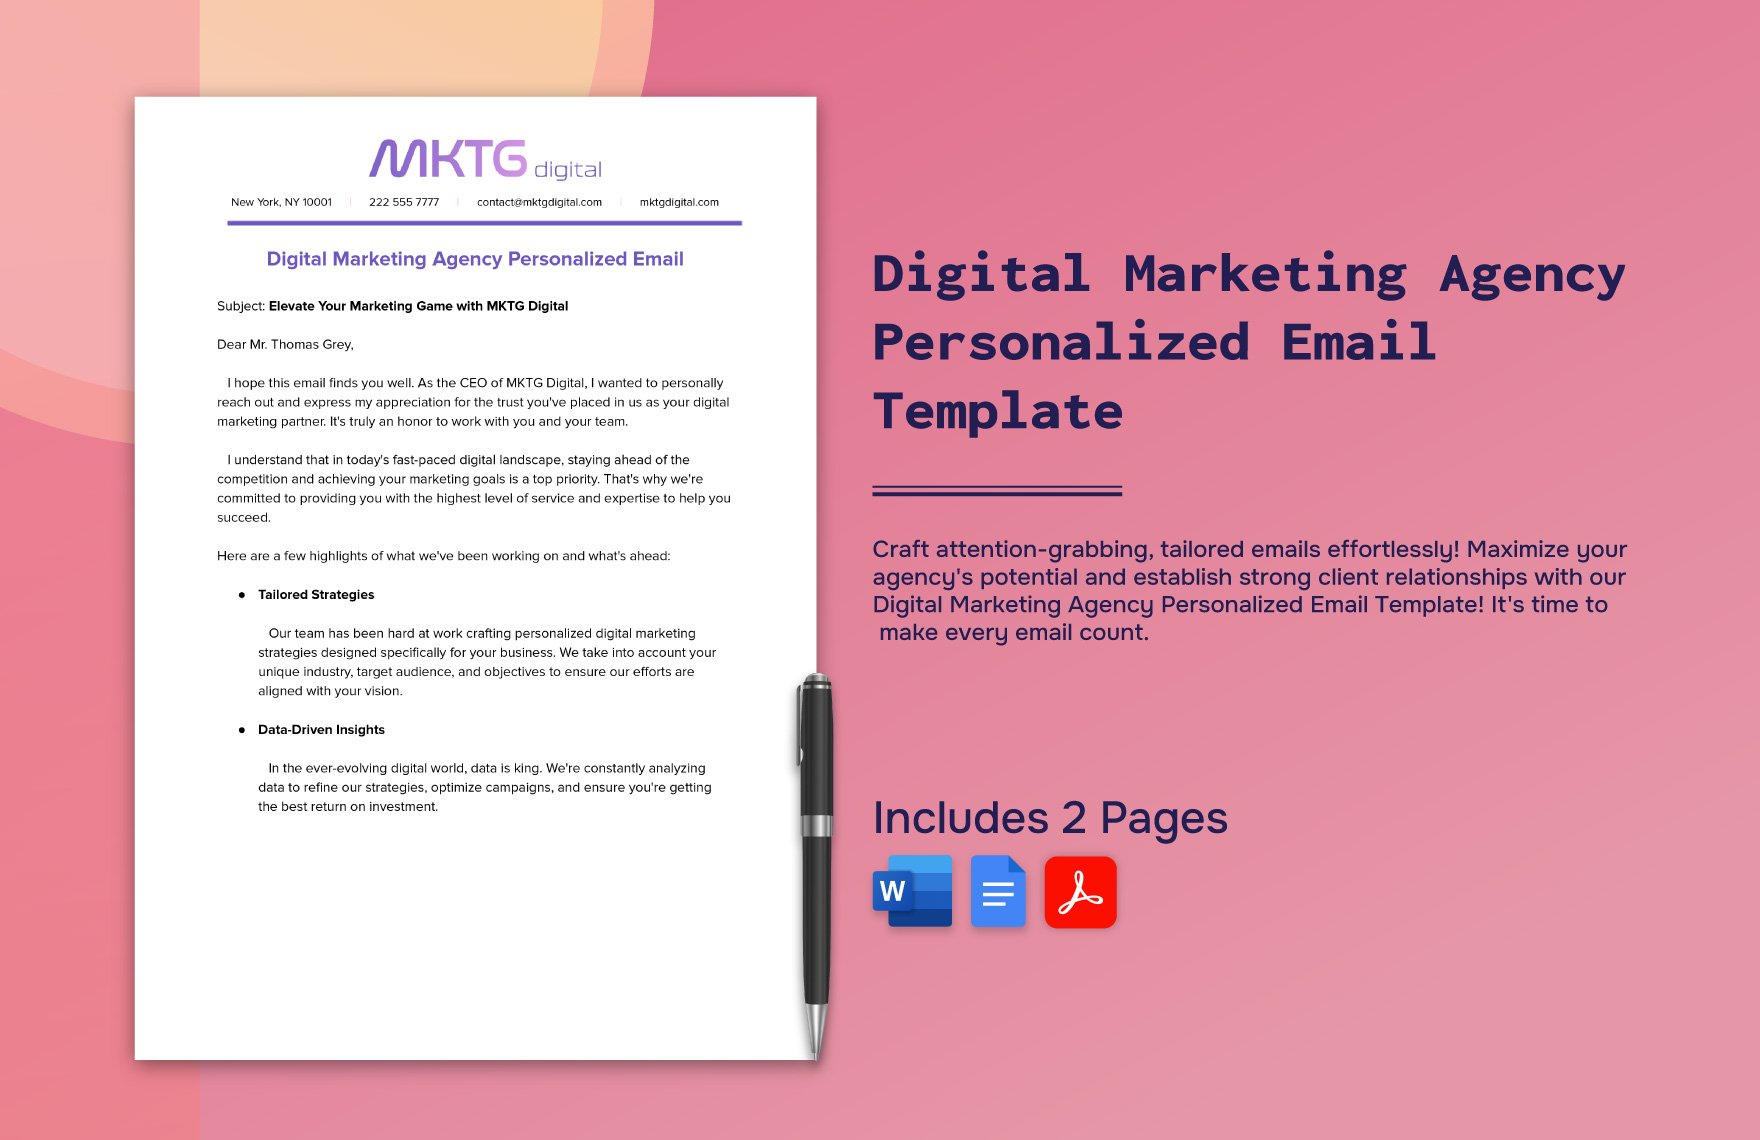 Digital Marketing Agency Personalized Email Template